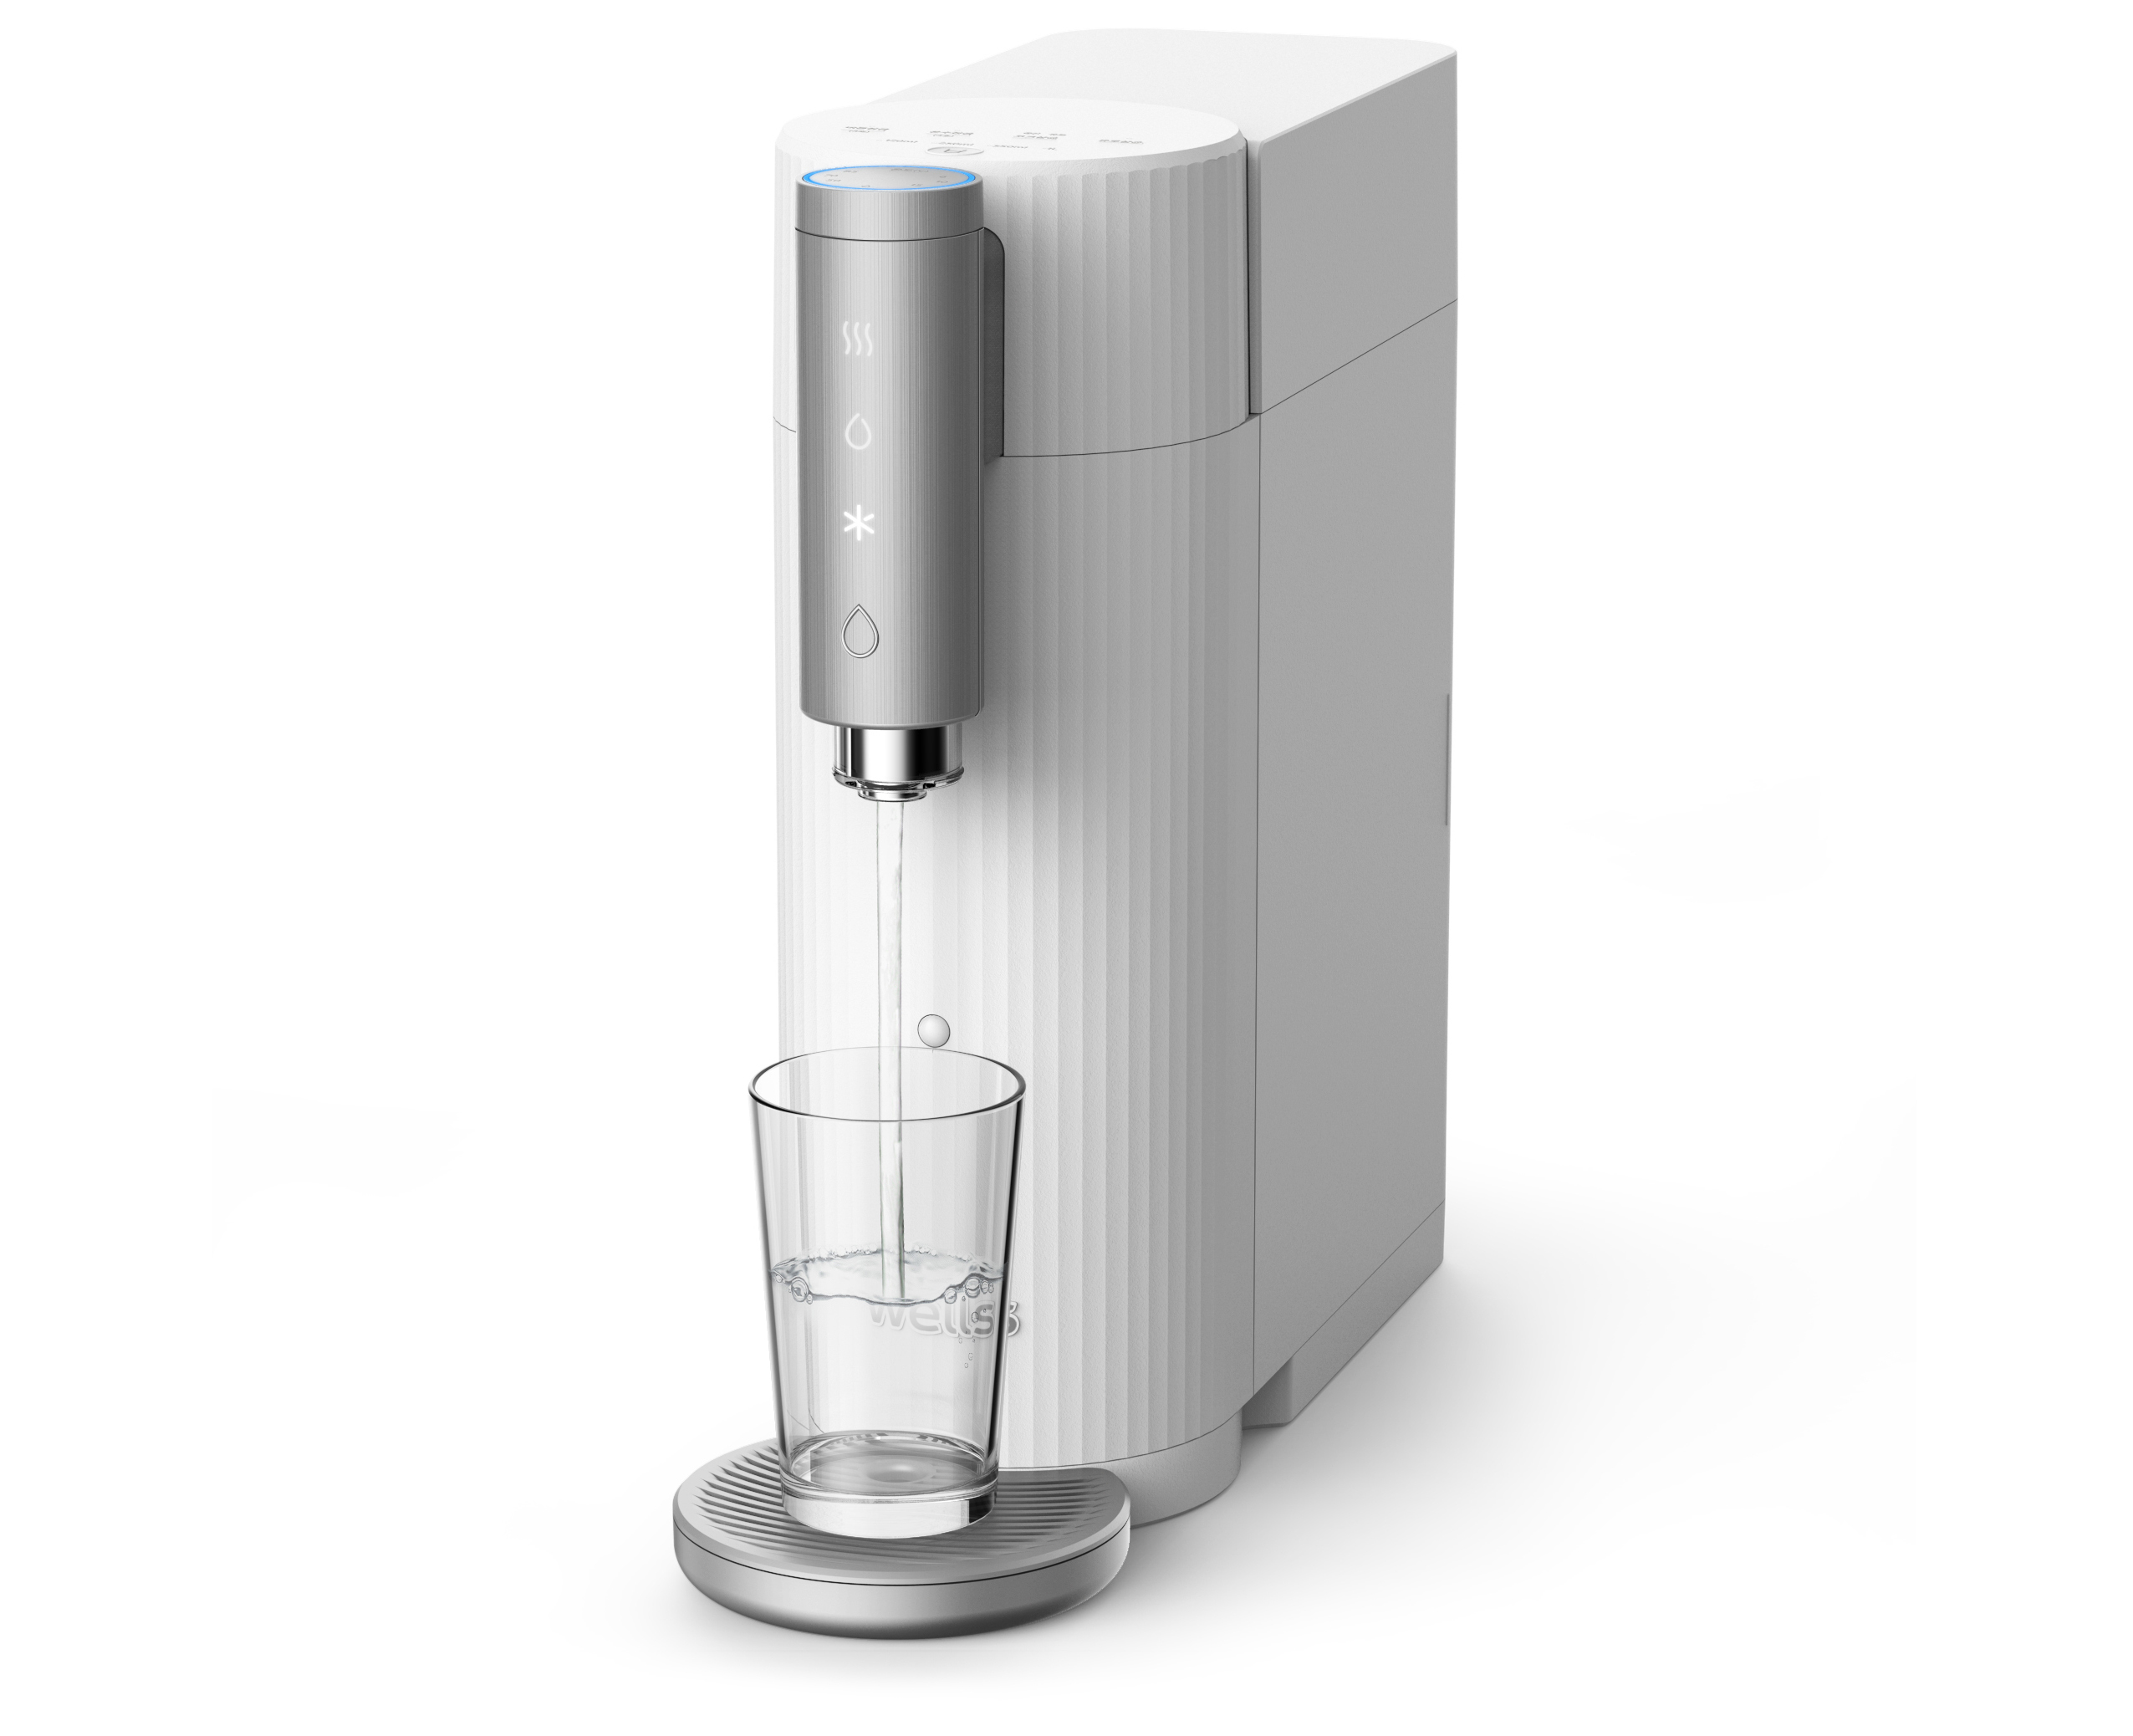 NGT Water Purifier